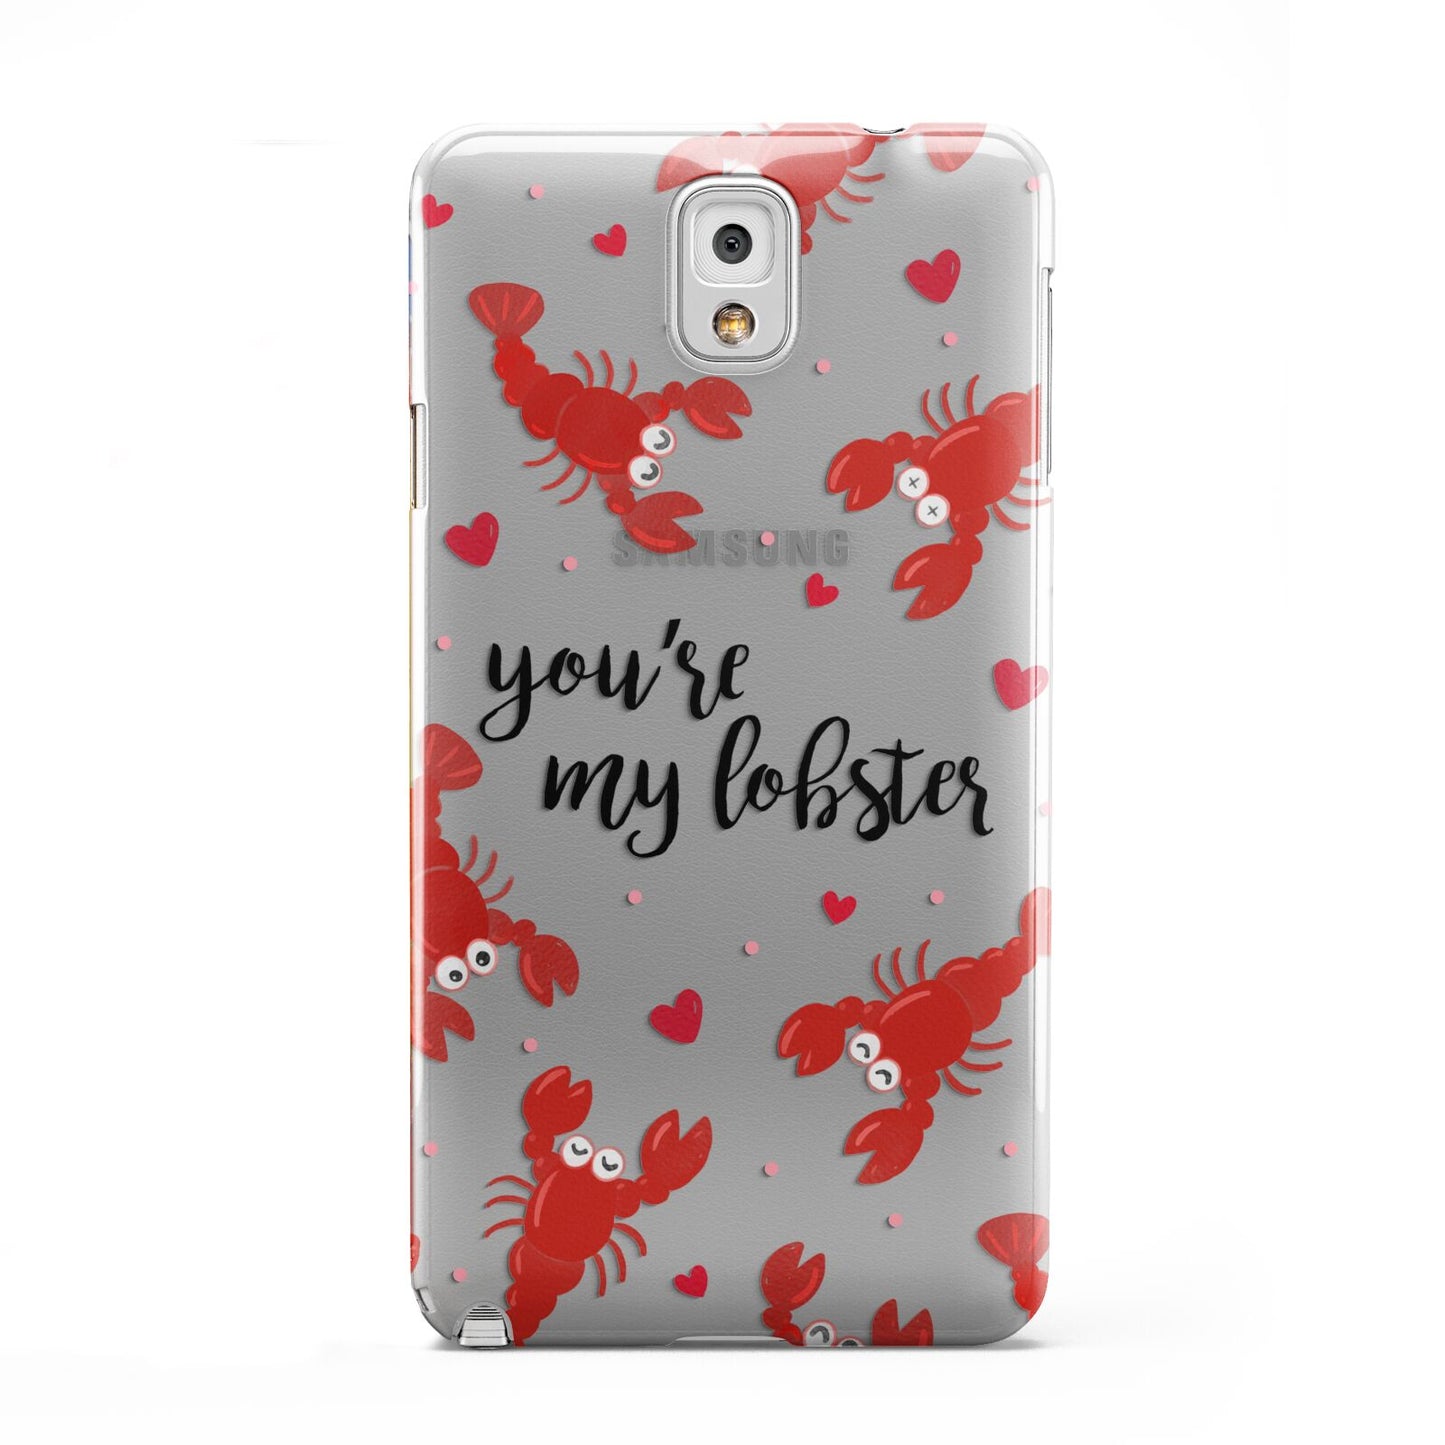 Youre My Lobster Samsung Galaxy Note 3 Case